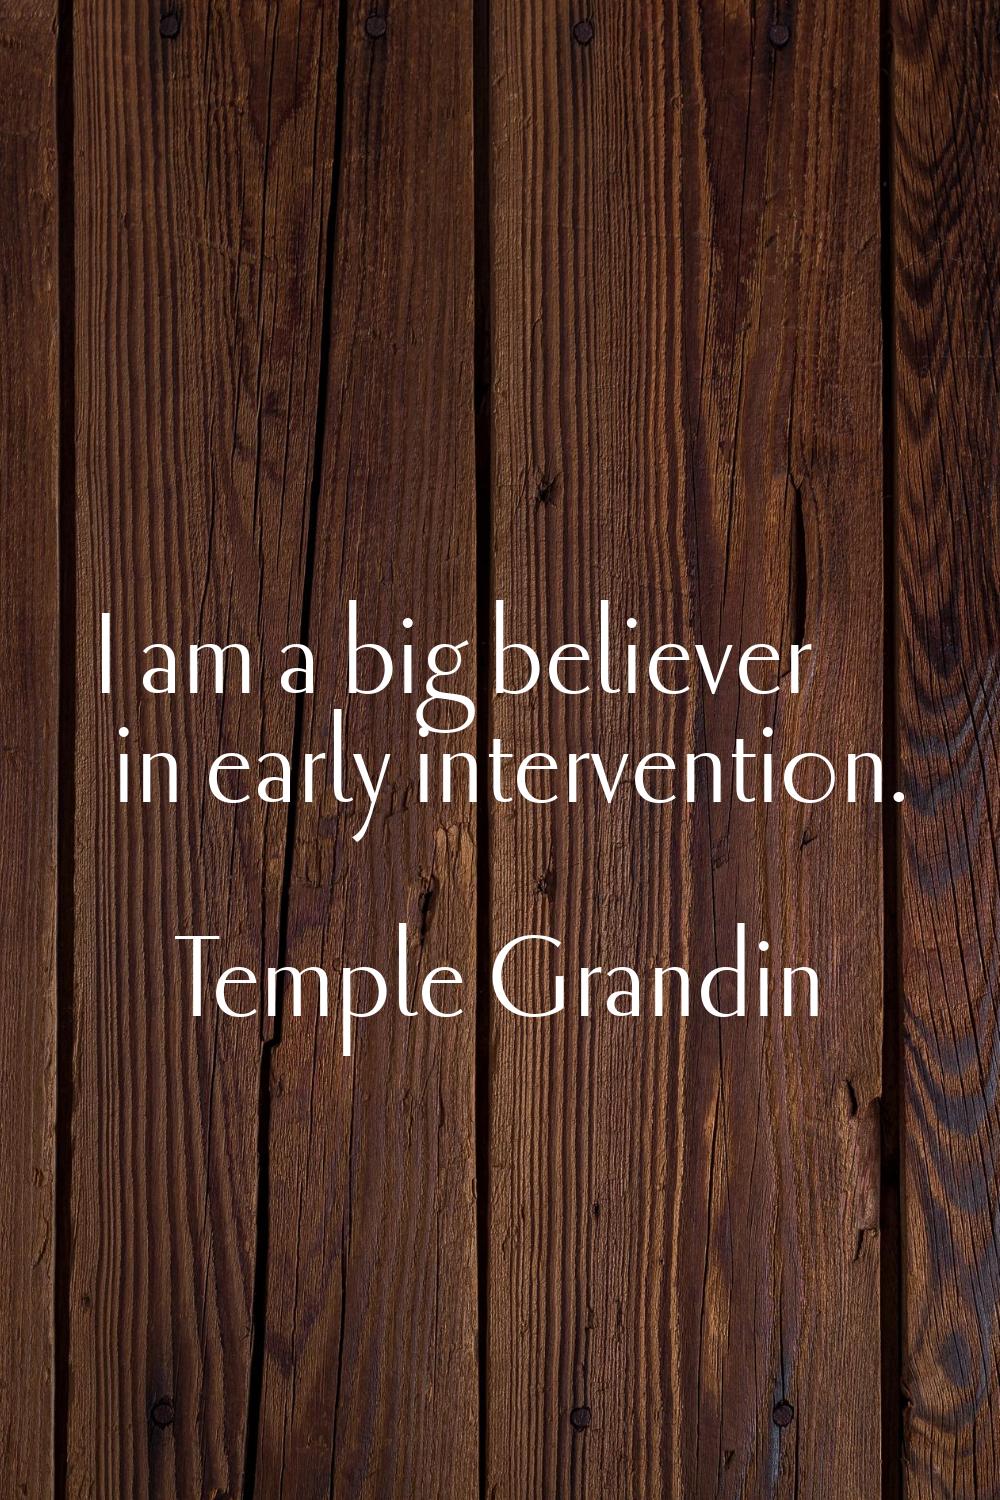 I am a big believer in early intervention.